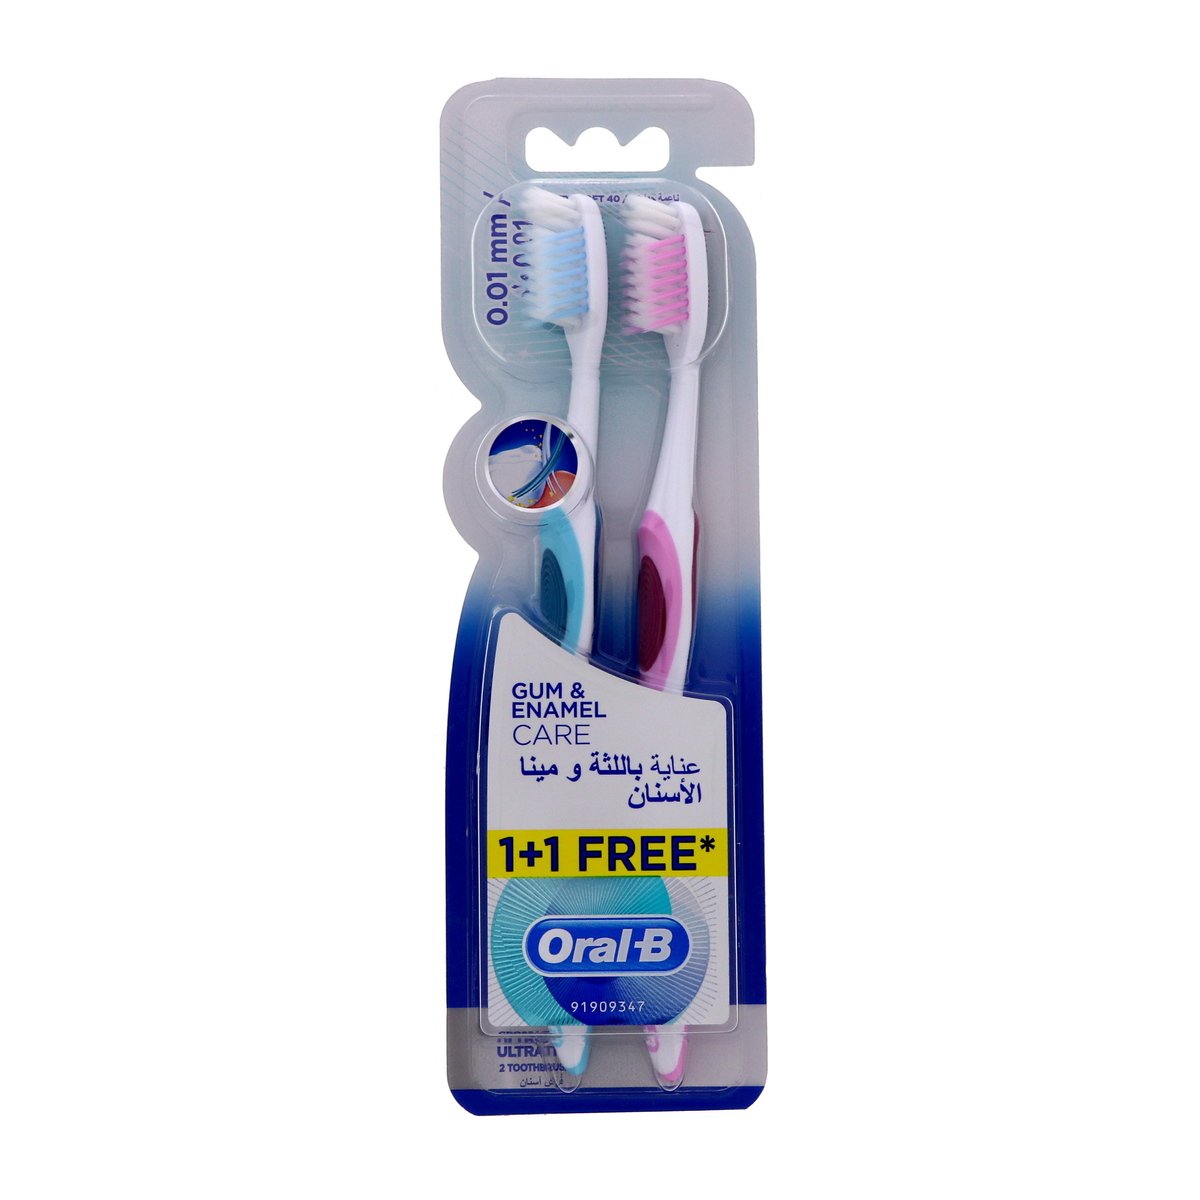 Oral-B Gum & Enamel Care Toothbrush Extra Soft Assorted 2pcs